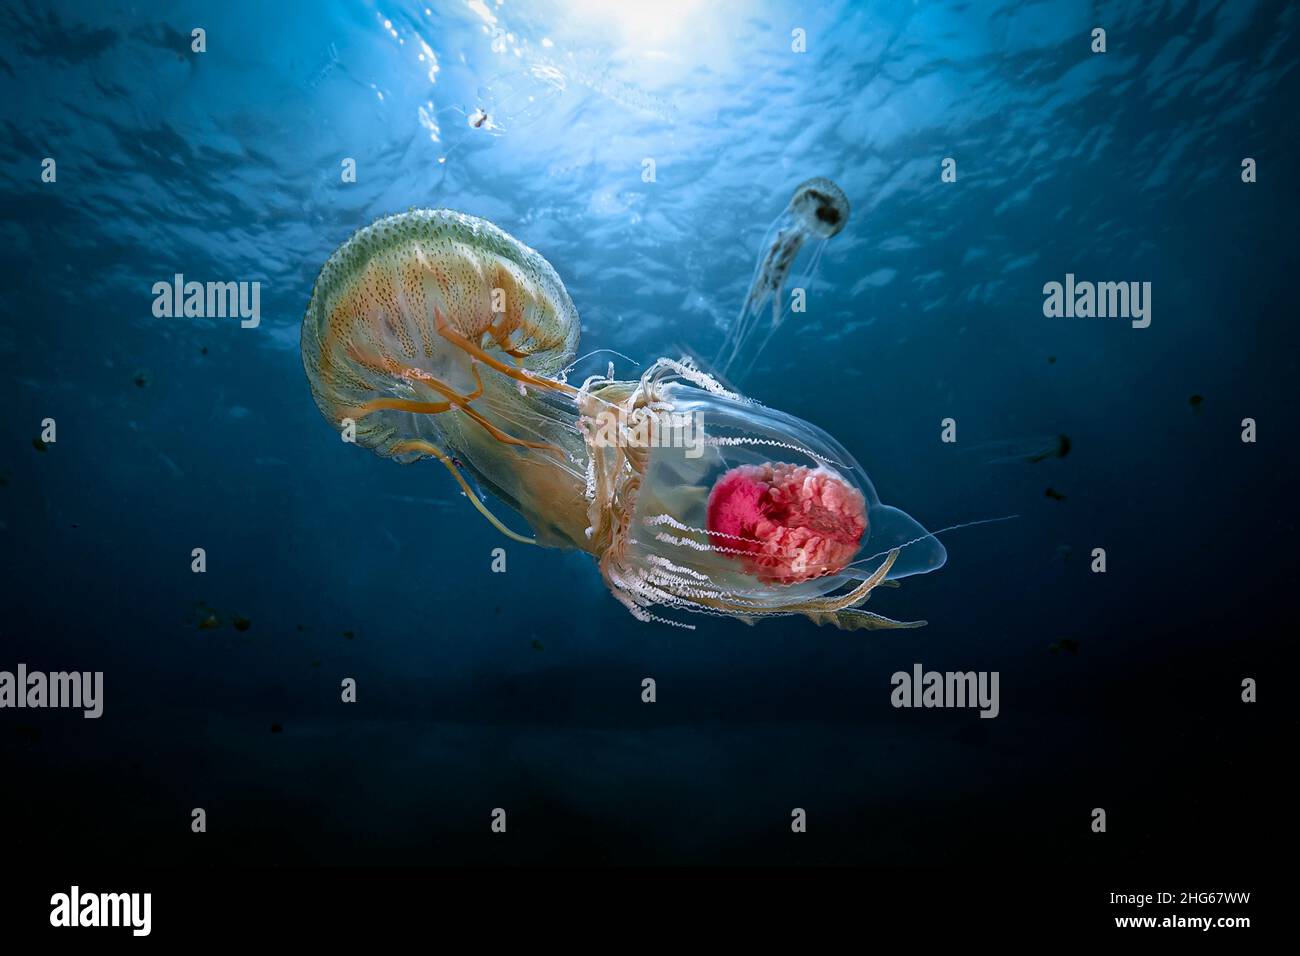 A common mediterranean jellyfish (Pelagia noctiluca) feasting on another mediterranean jellyfish (Neoturris pileata), rarely seen in shallow waters. T Stock Photo